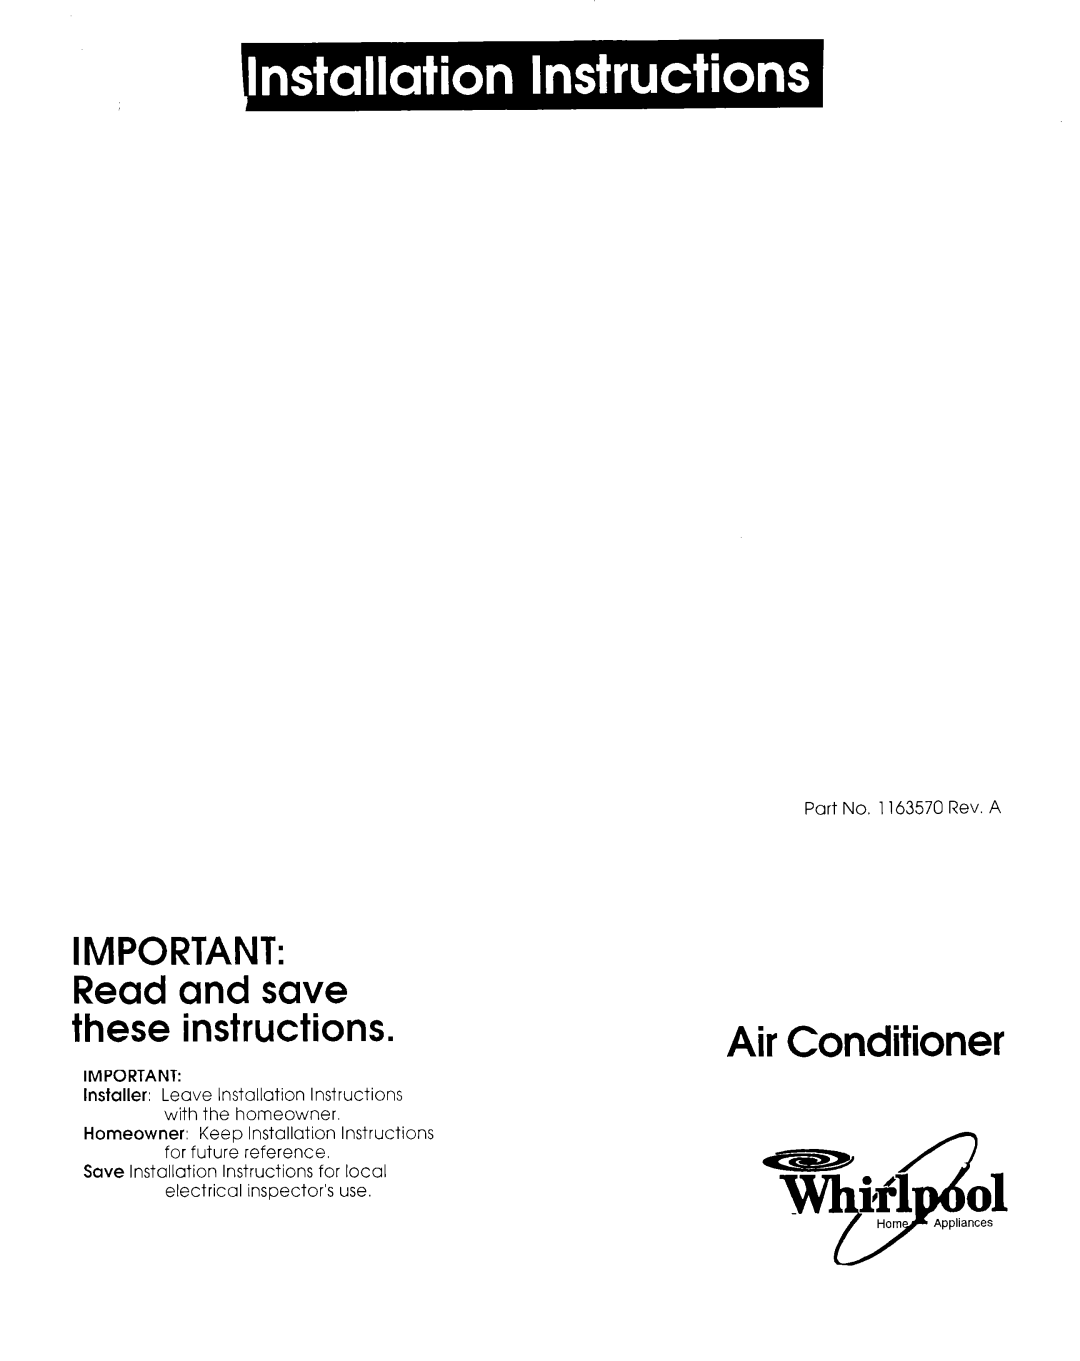 Whirlpool 1163570 installation instructions Air Conditioner, IMPORTANT Read and save these instructions 